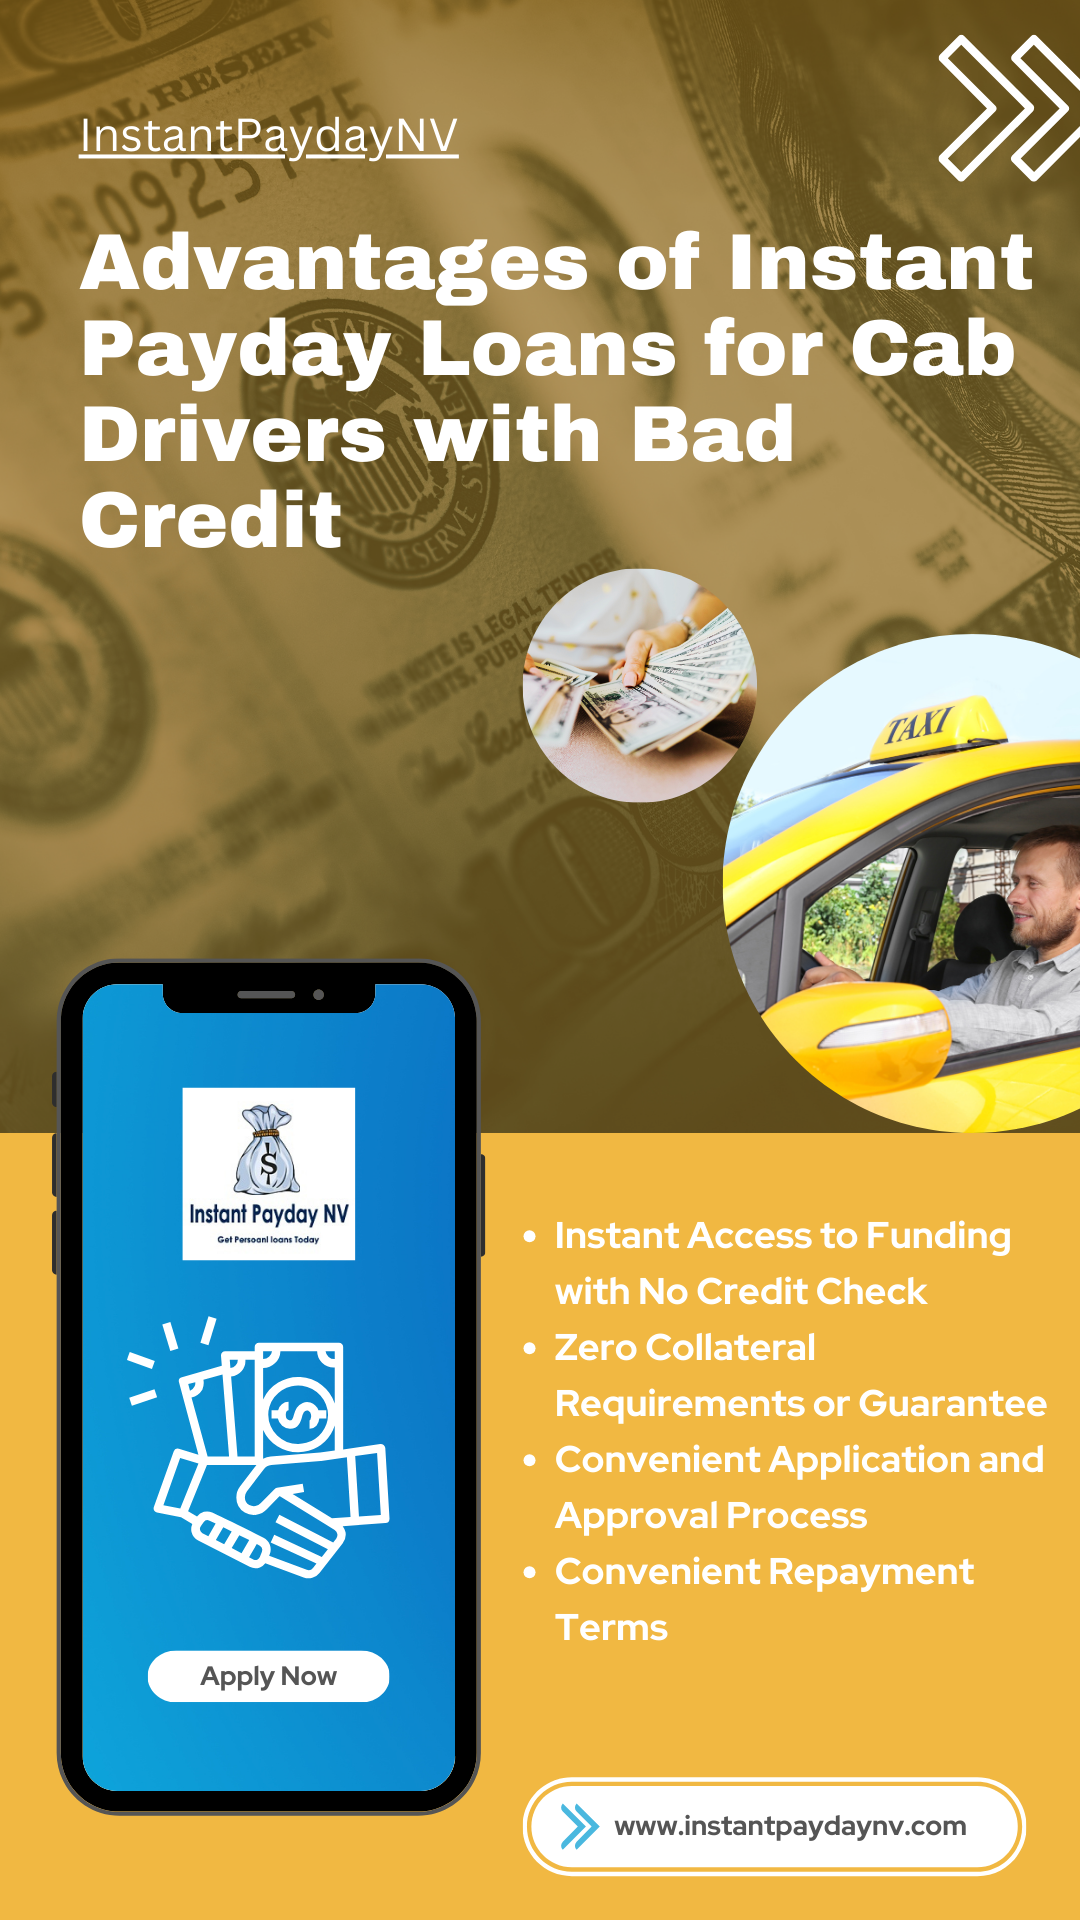 Advantages of Instant Payday Loans for Cab Drivers with Bad Credit